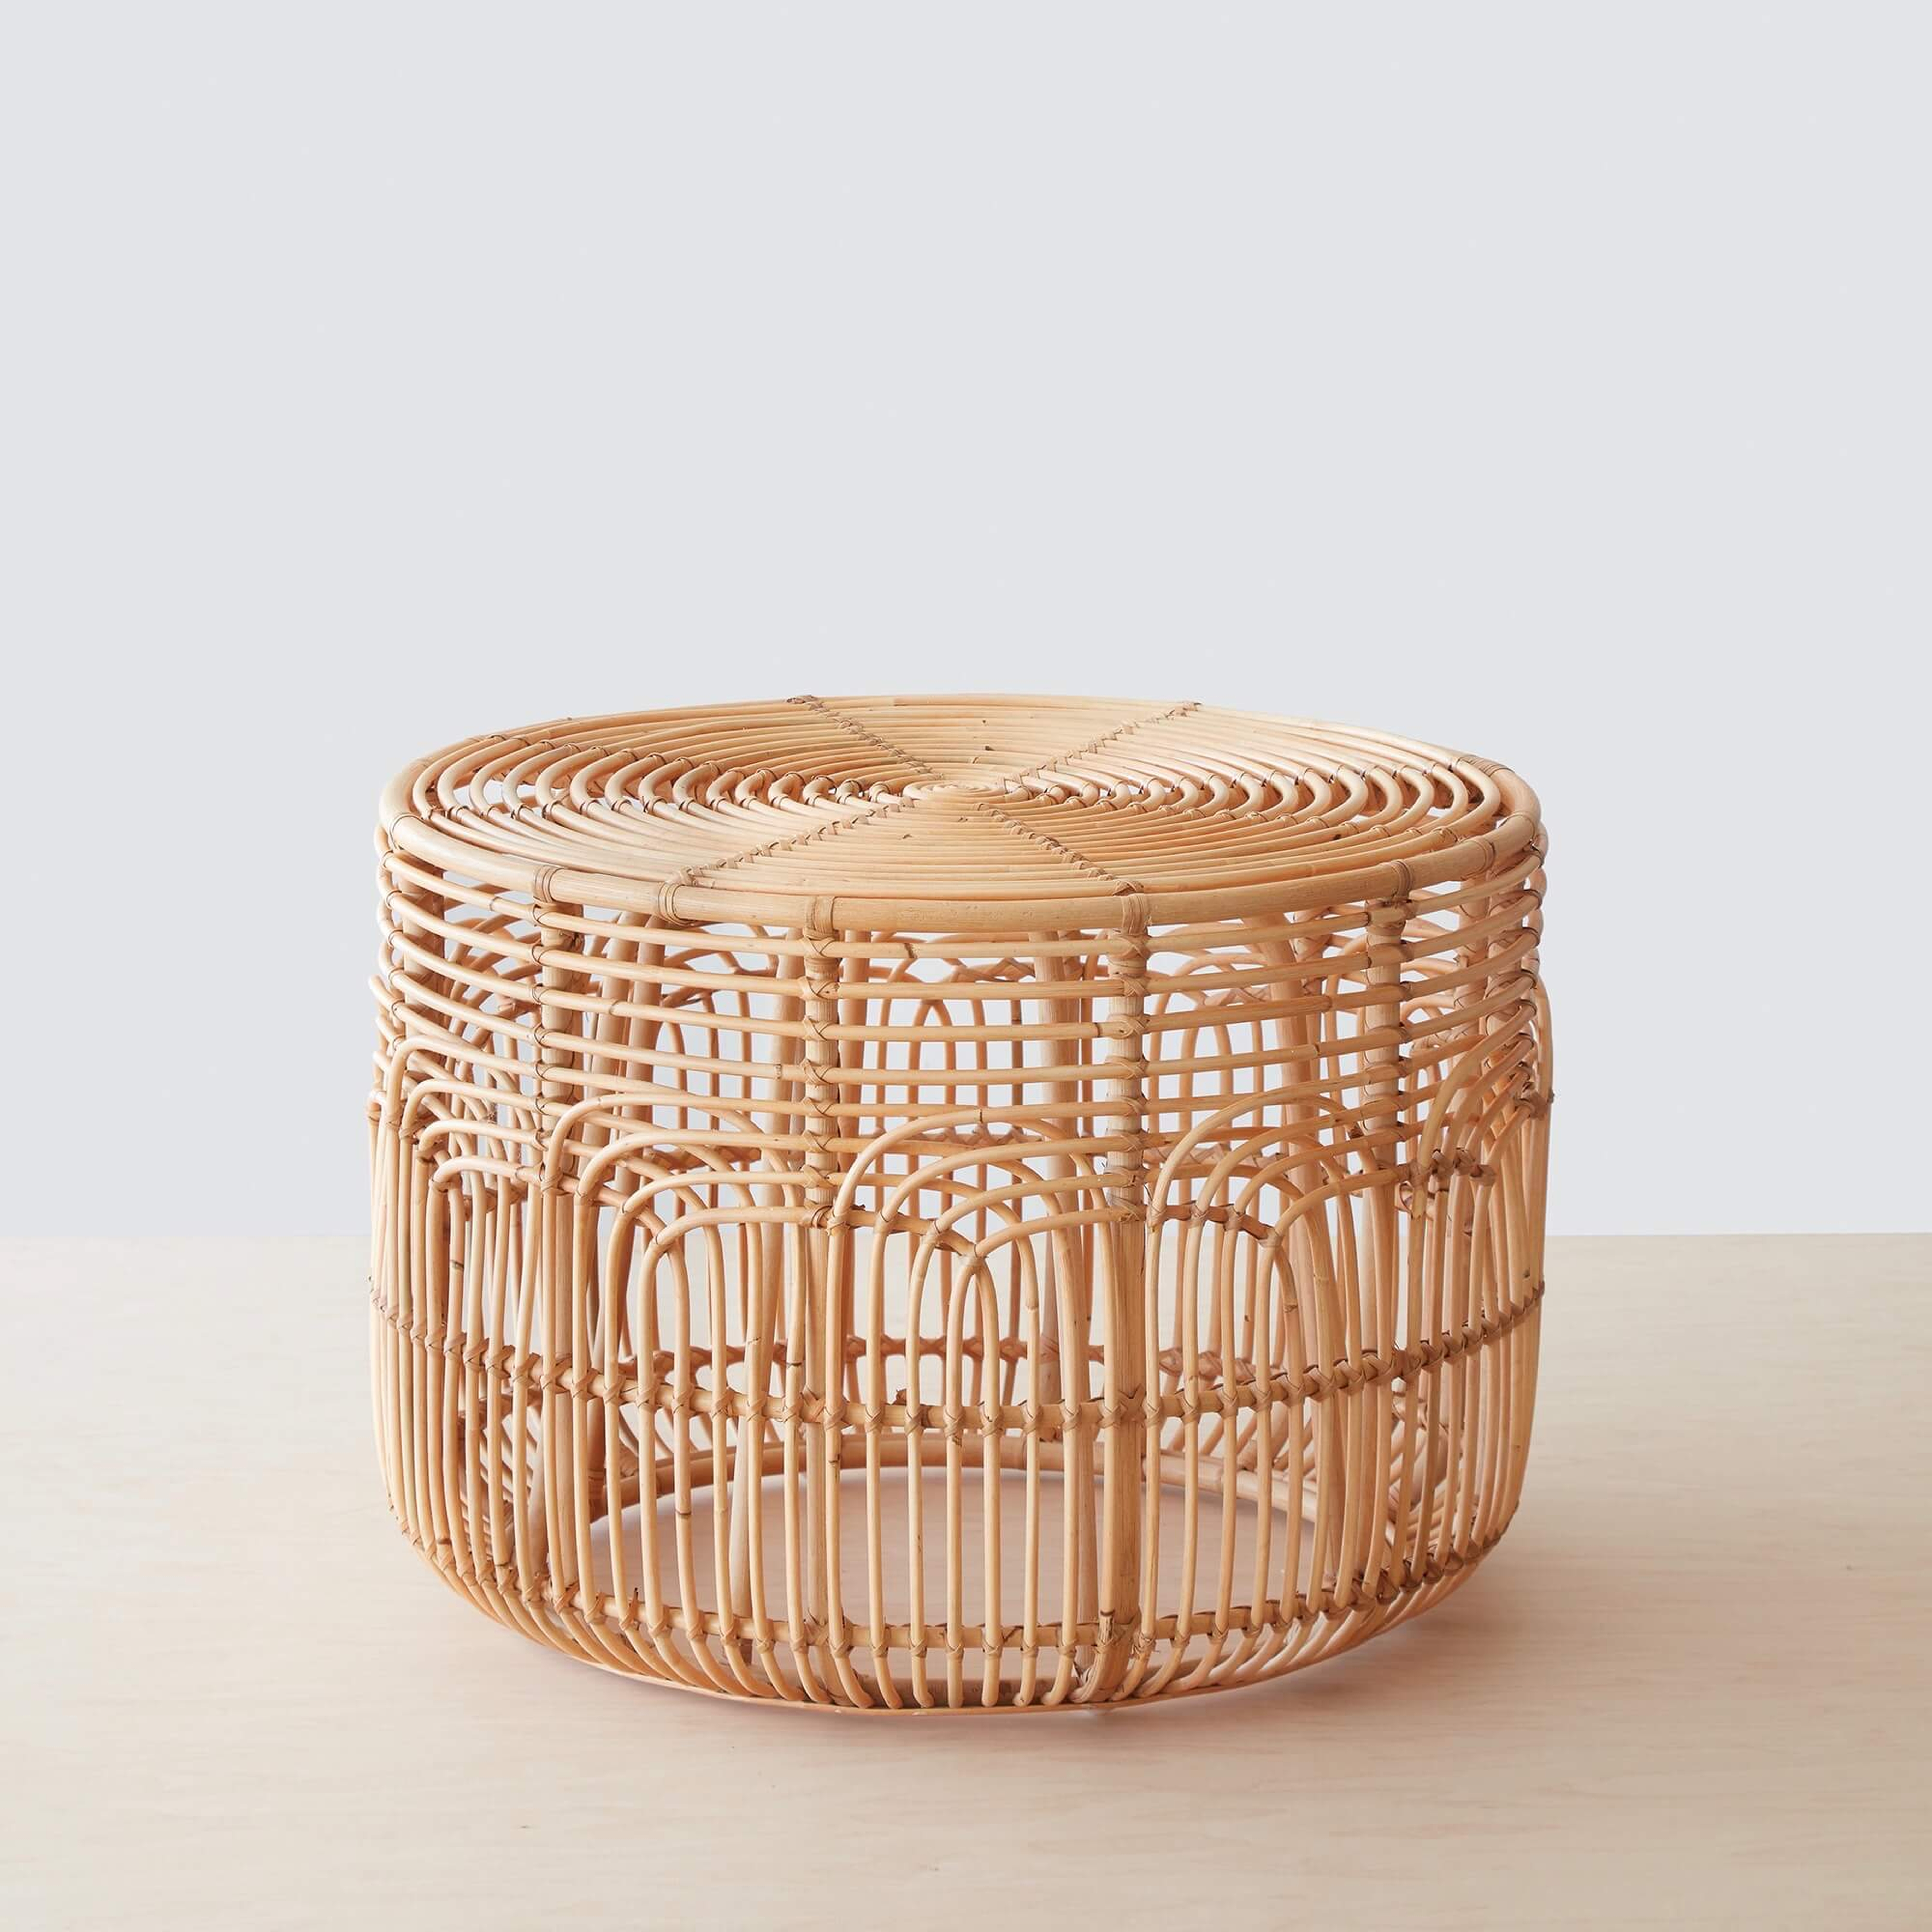 Naga Rattan Side Table By The Citizenry - The Citizenry